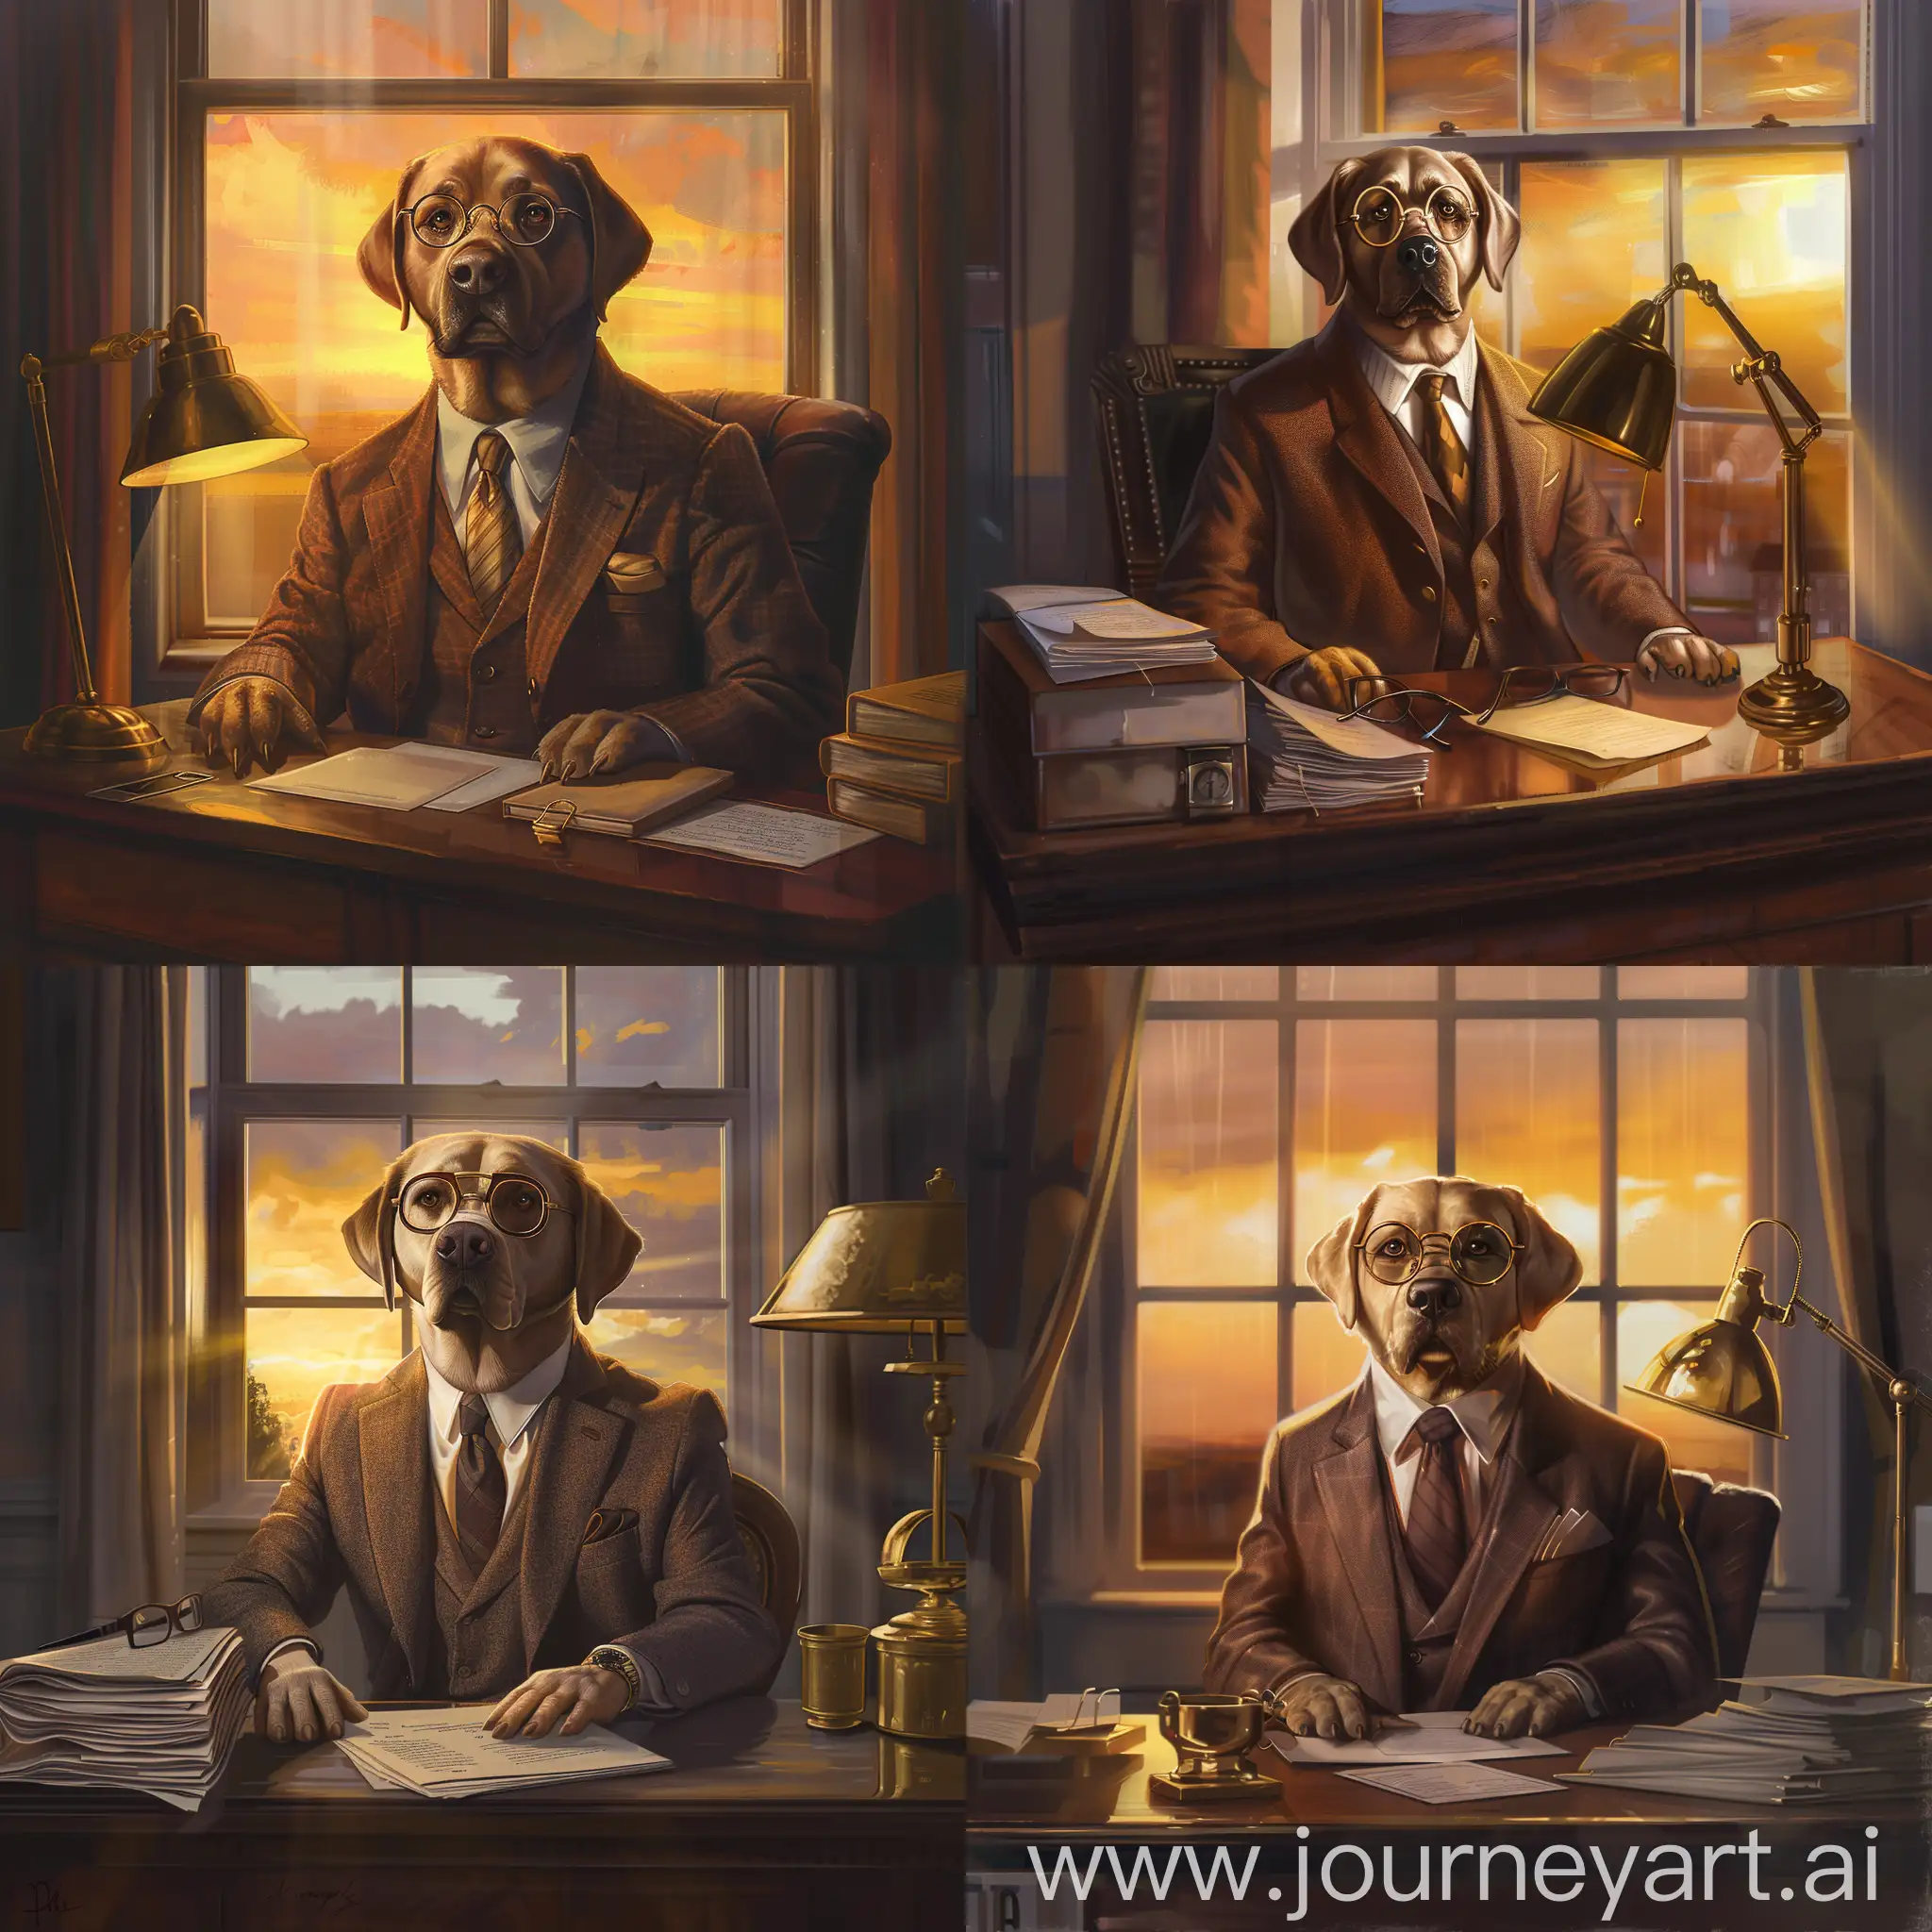 Description: Imagine a refined Labrador Retriever dressed in a tailored wool business suit, complete with a sleek tie and sophisticated horn-rimmed glasses. Picture this distinguished canine seated at a mahogany desk, adorned with neatly stacked papers and a polished brass lamp. Outside the window, the gentle rays of a sunset cast a warm glow, illuminating the scene with a sense of tranquility and sophistication. Your task is to bring this scene to life in your preferred art style, capturing the elegance and poise of the Labrador Executive in this unique setting.